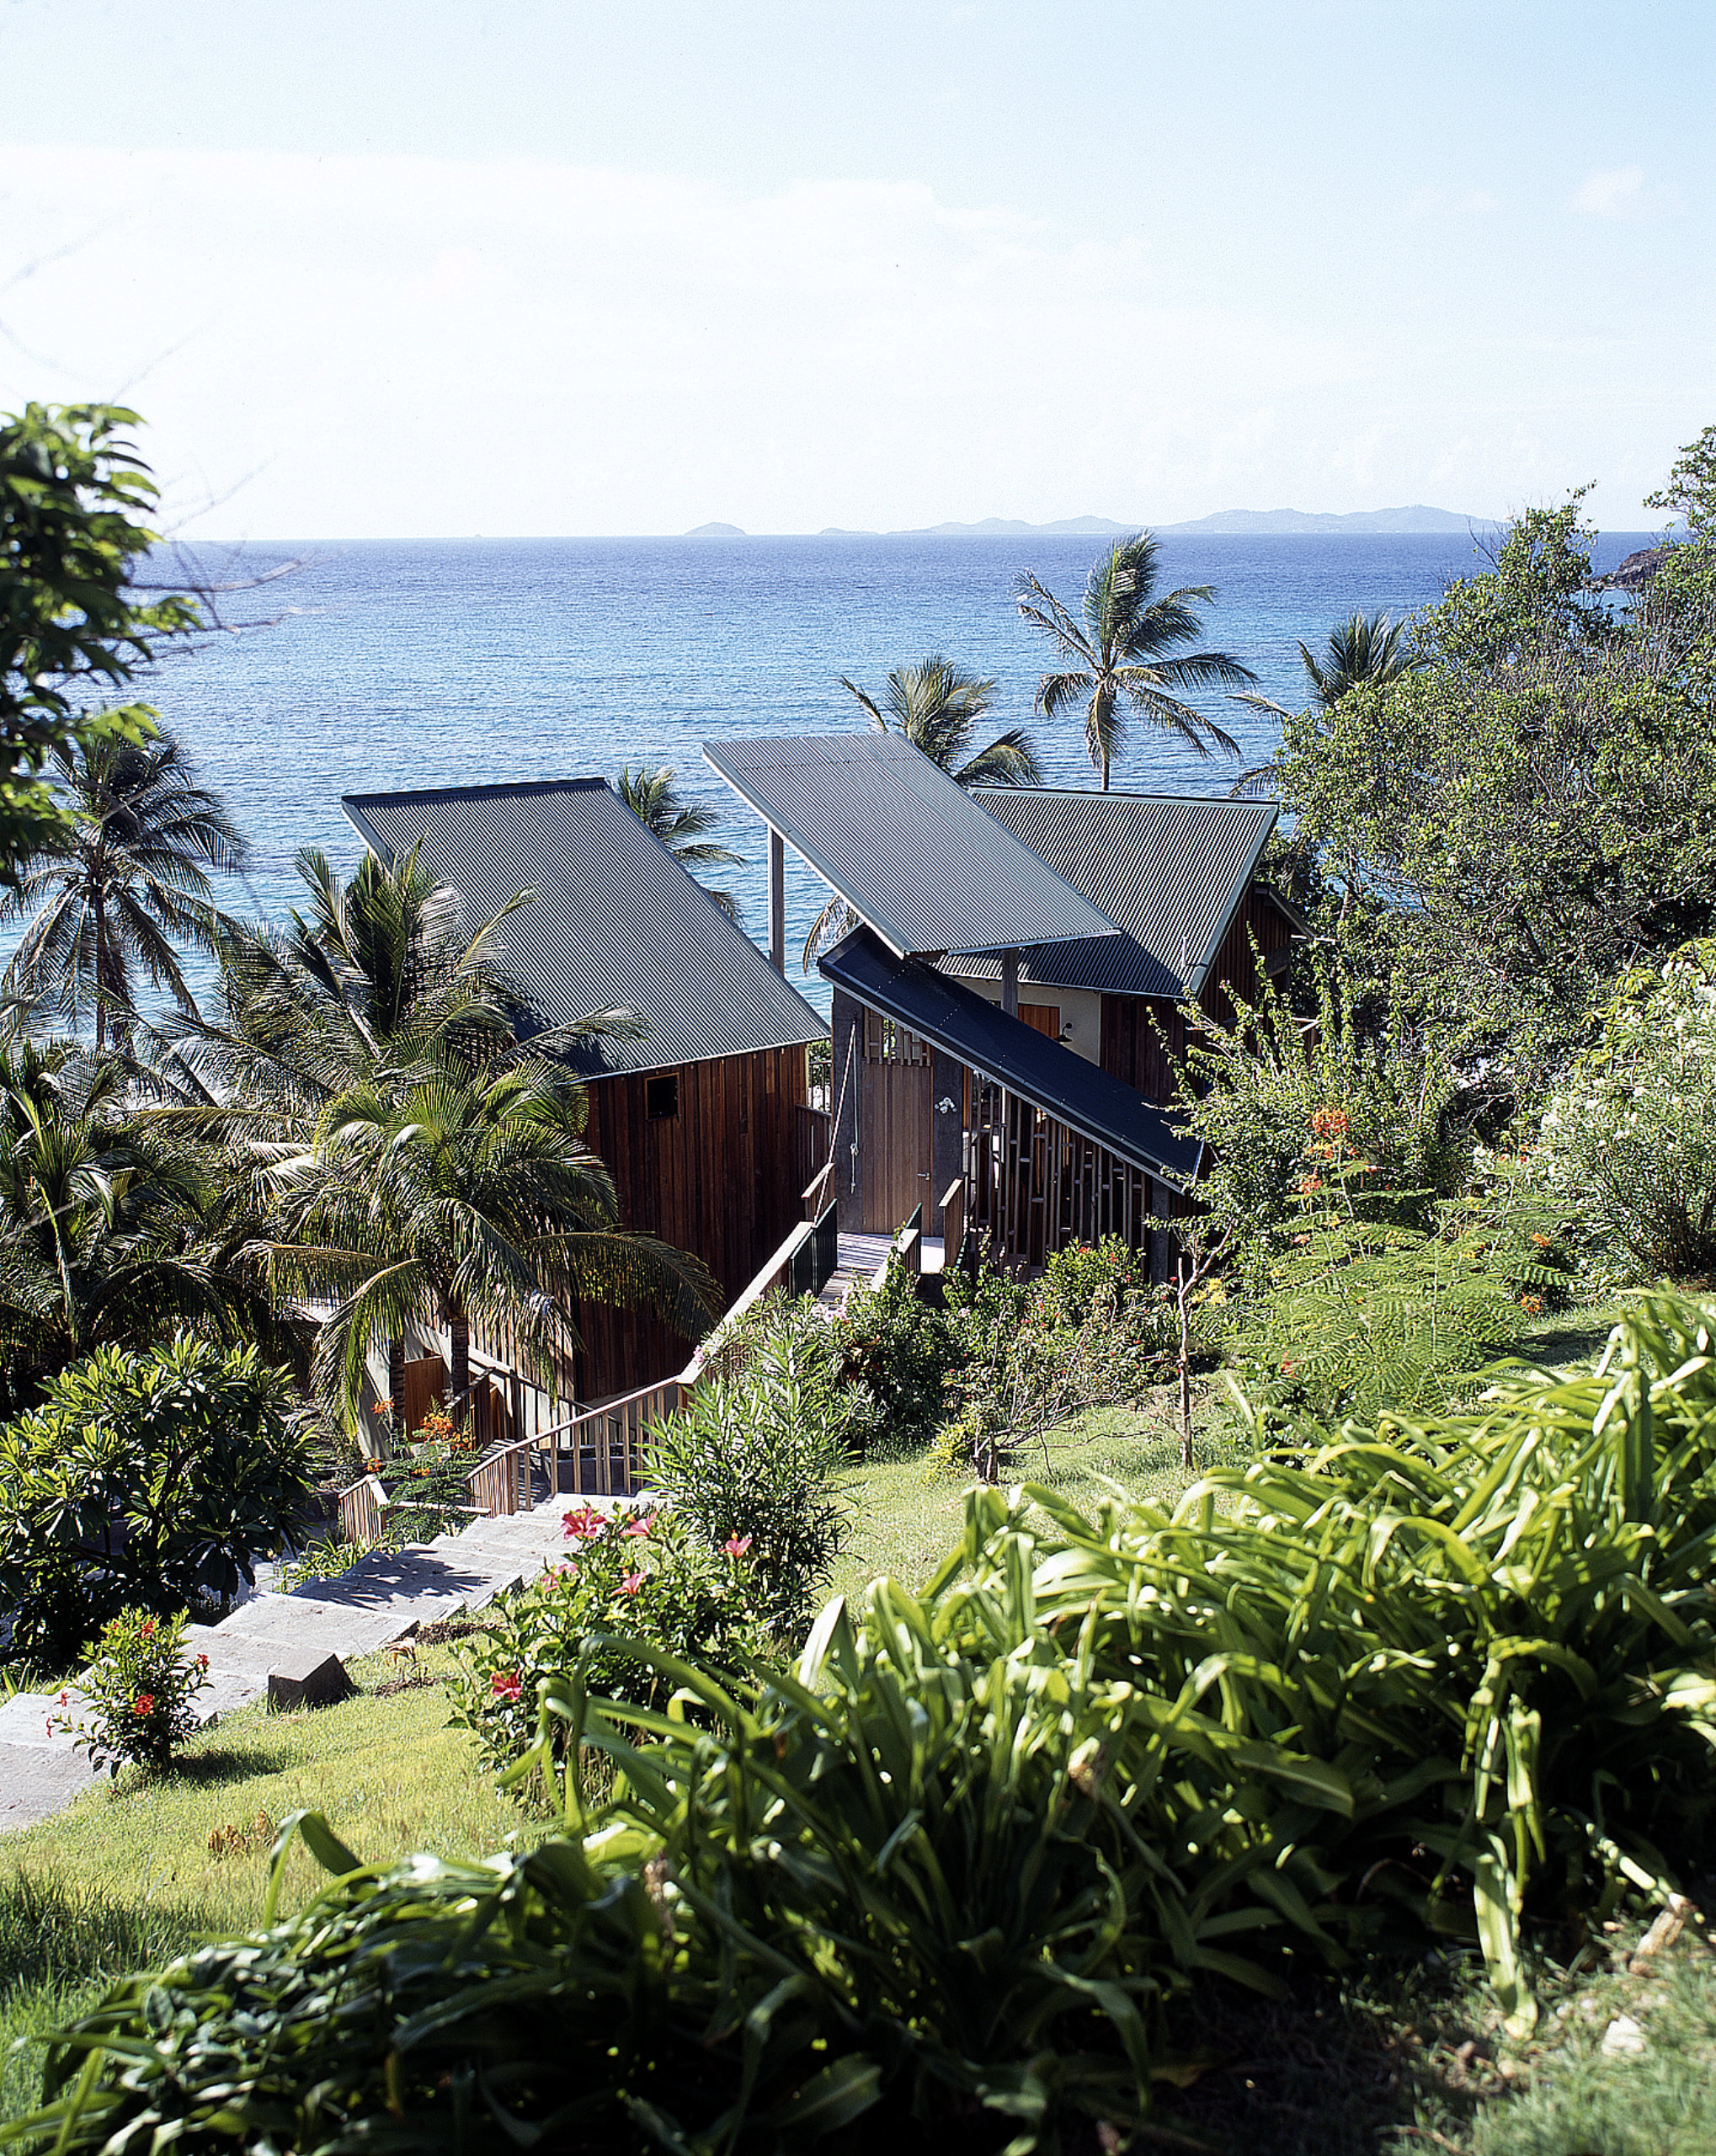 Guesthouse on Bequia, St. Vincent and the Grenadines, Caribbean